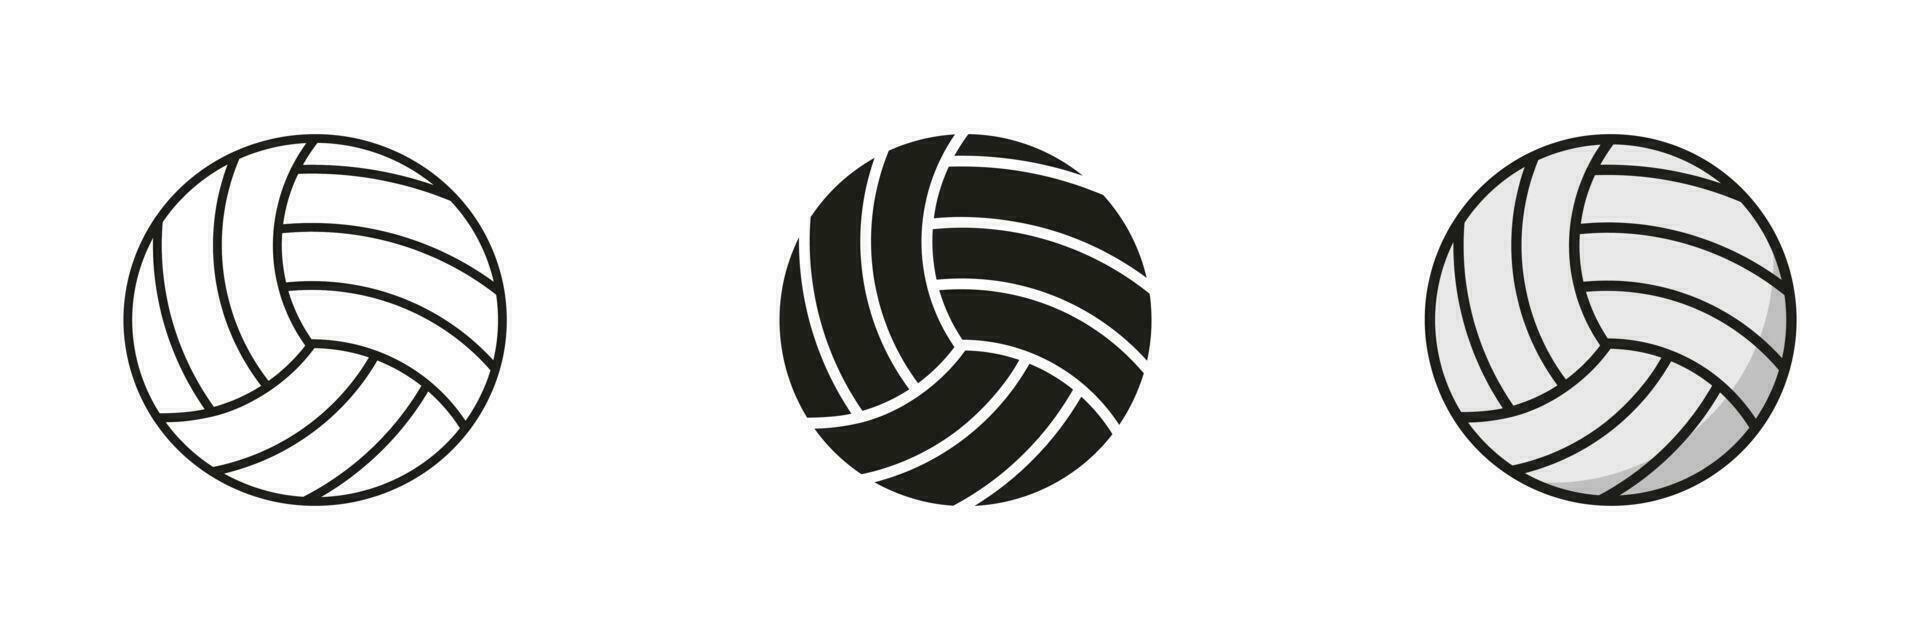 Volleyball Ball Black Silhouette and Line Icon Set. Ball for Play Sports Game Solid and Outline Black and Color Symbol Collection on White Background. Isolated Vector Illustration.